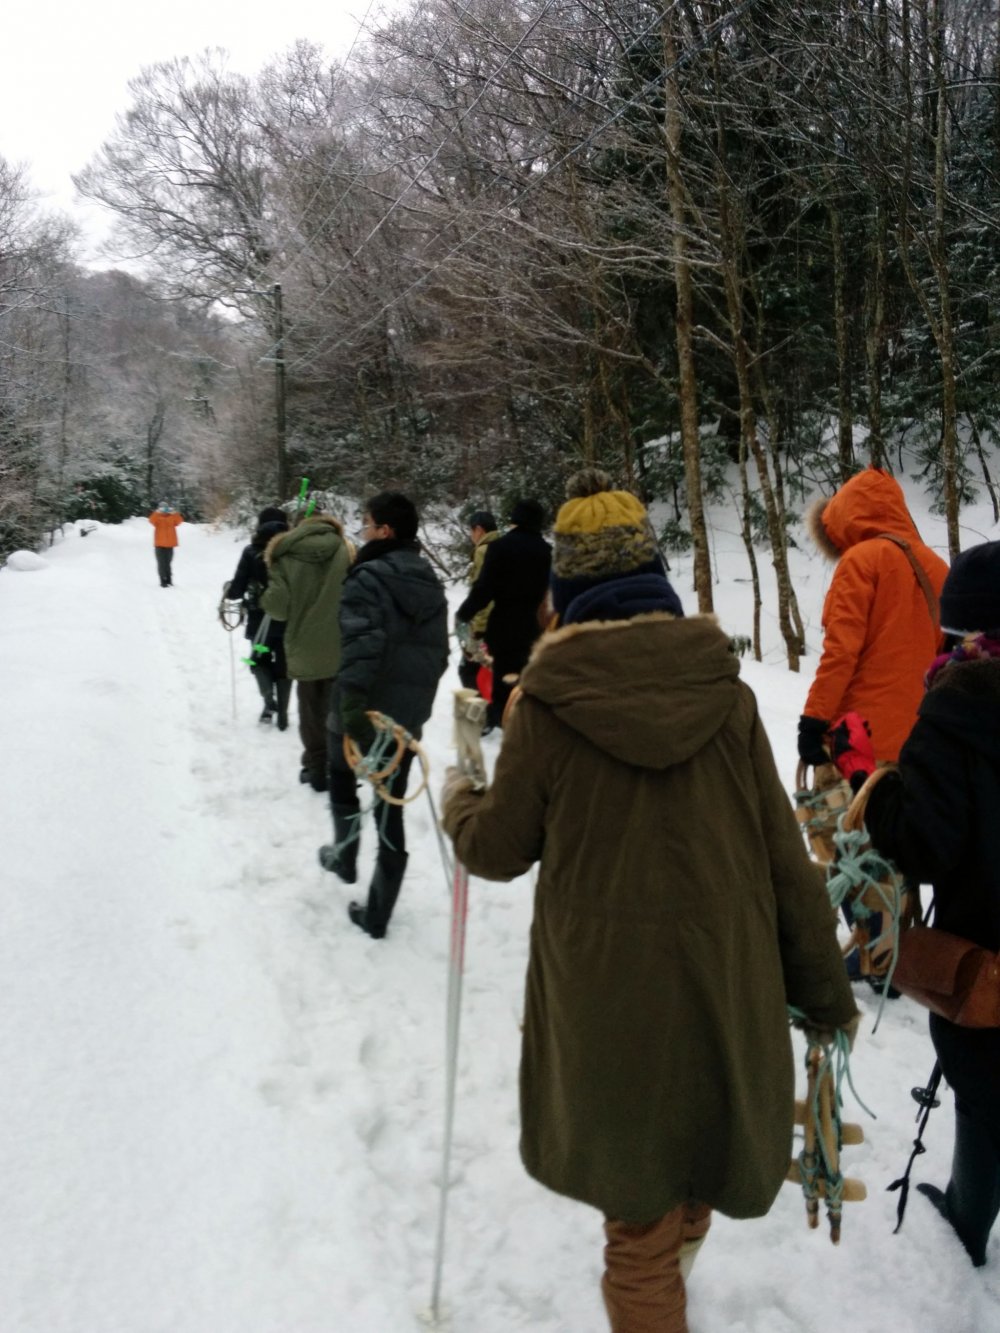 Our trekking continues through the snowy landscape.&nbsp;